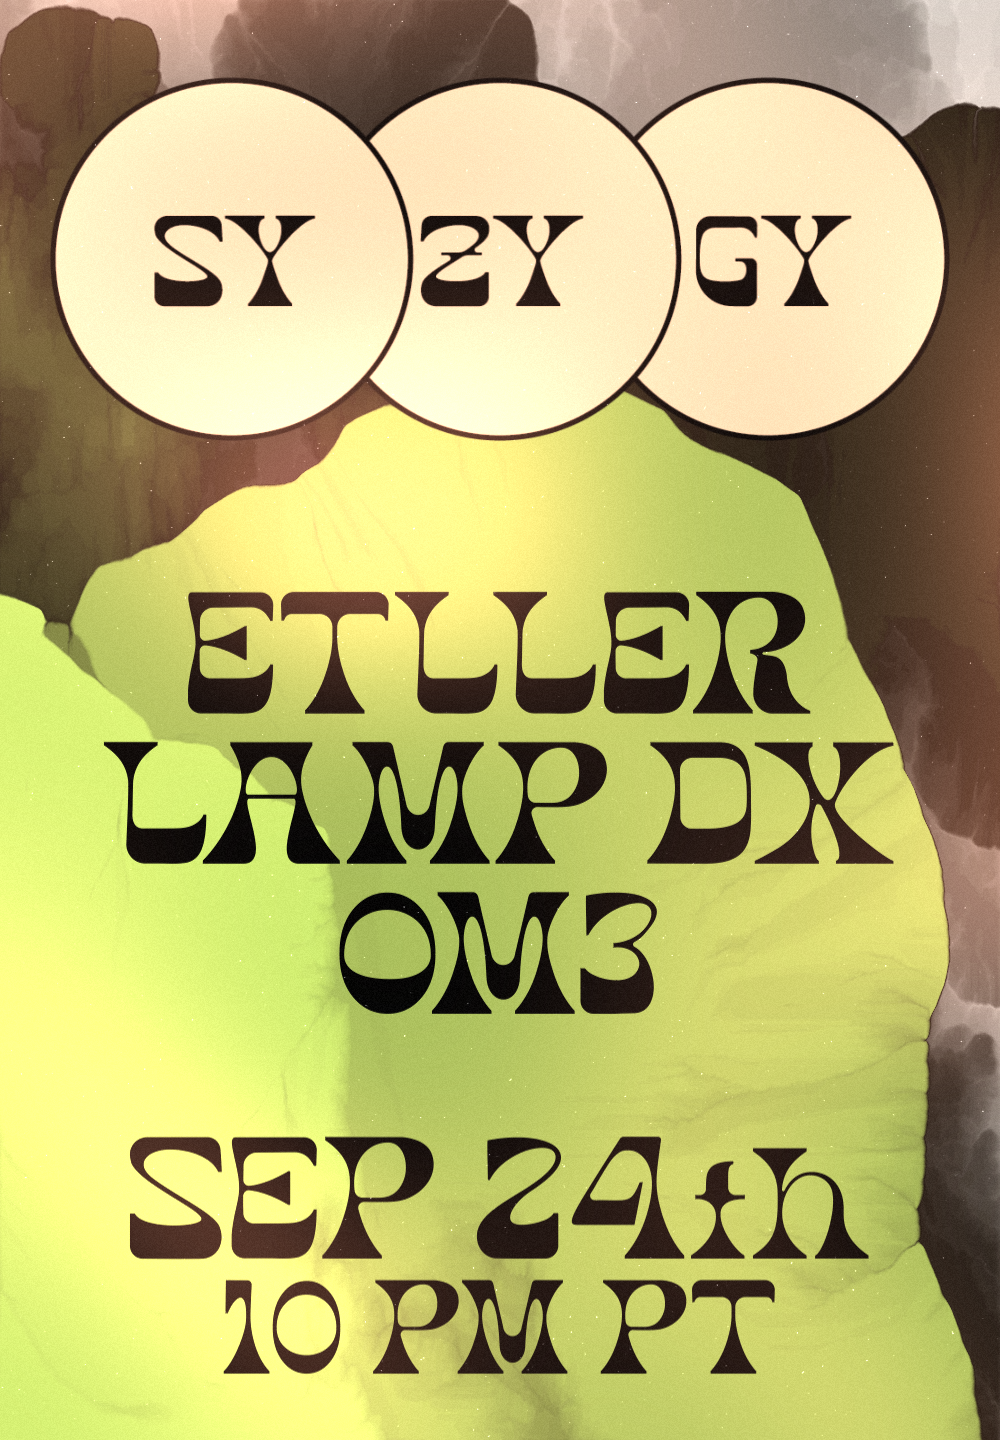 Flyer for SYZYGY ONE